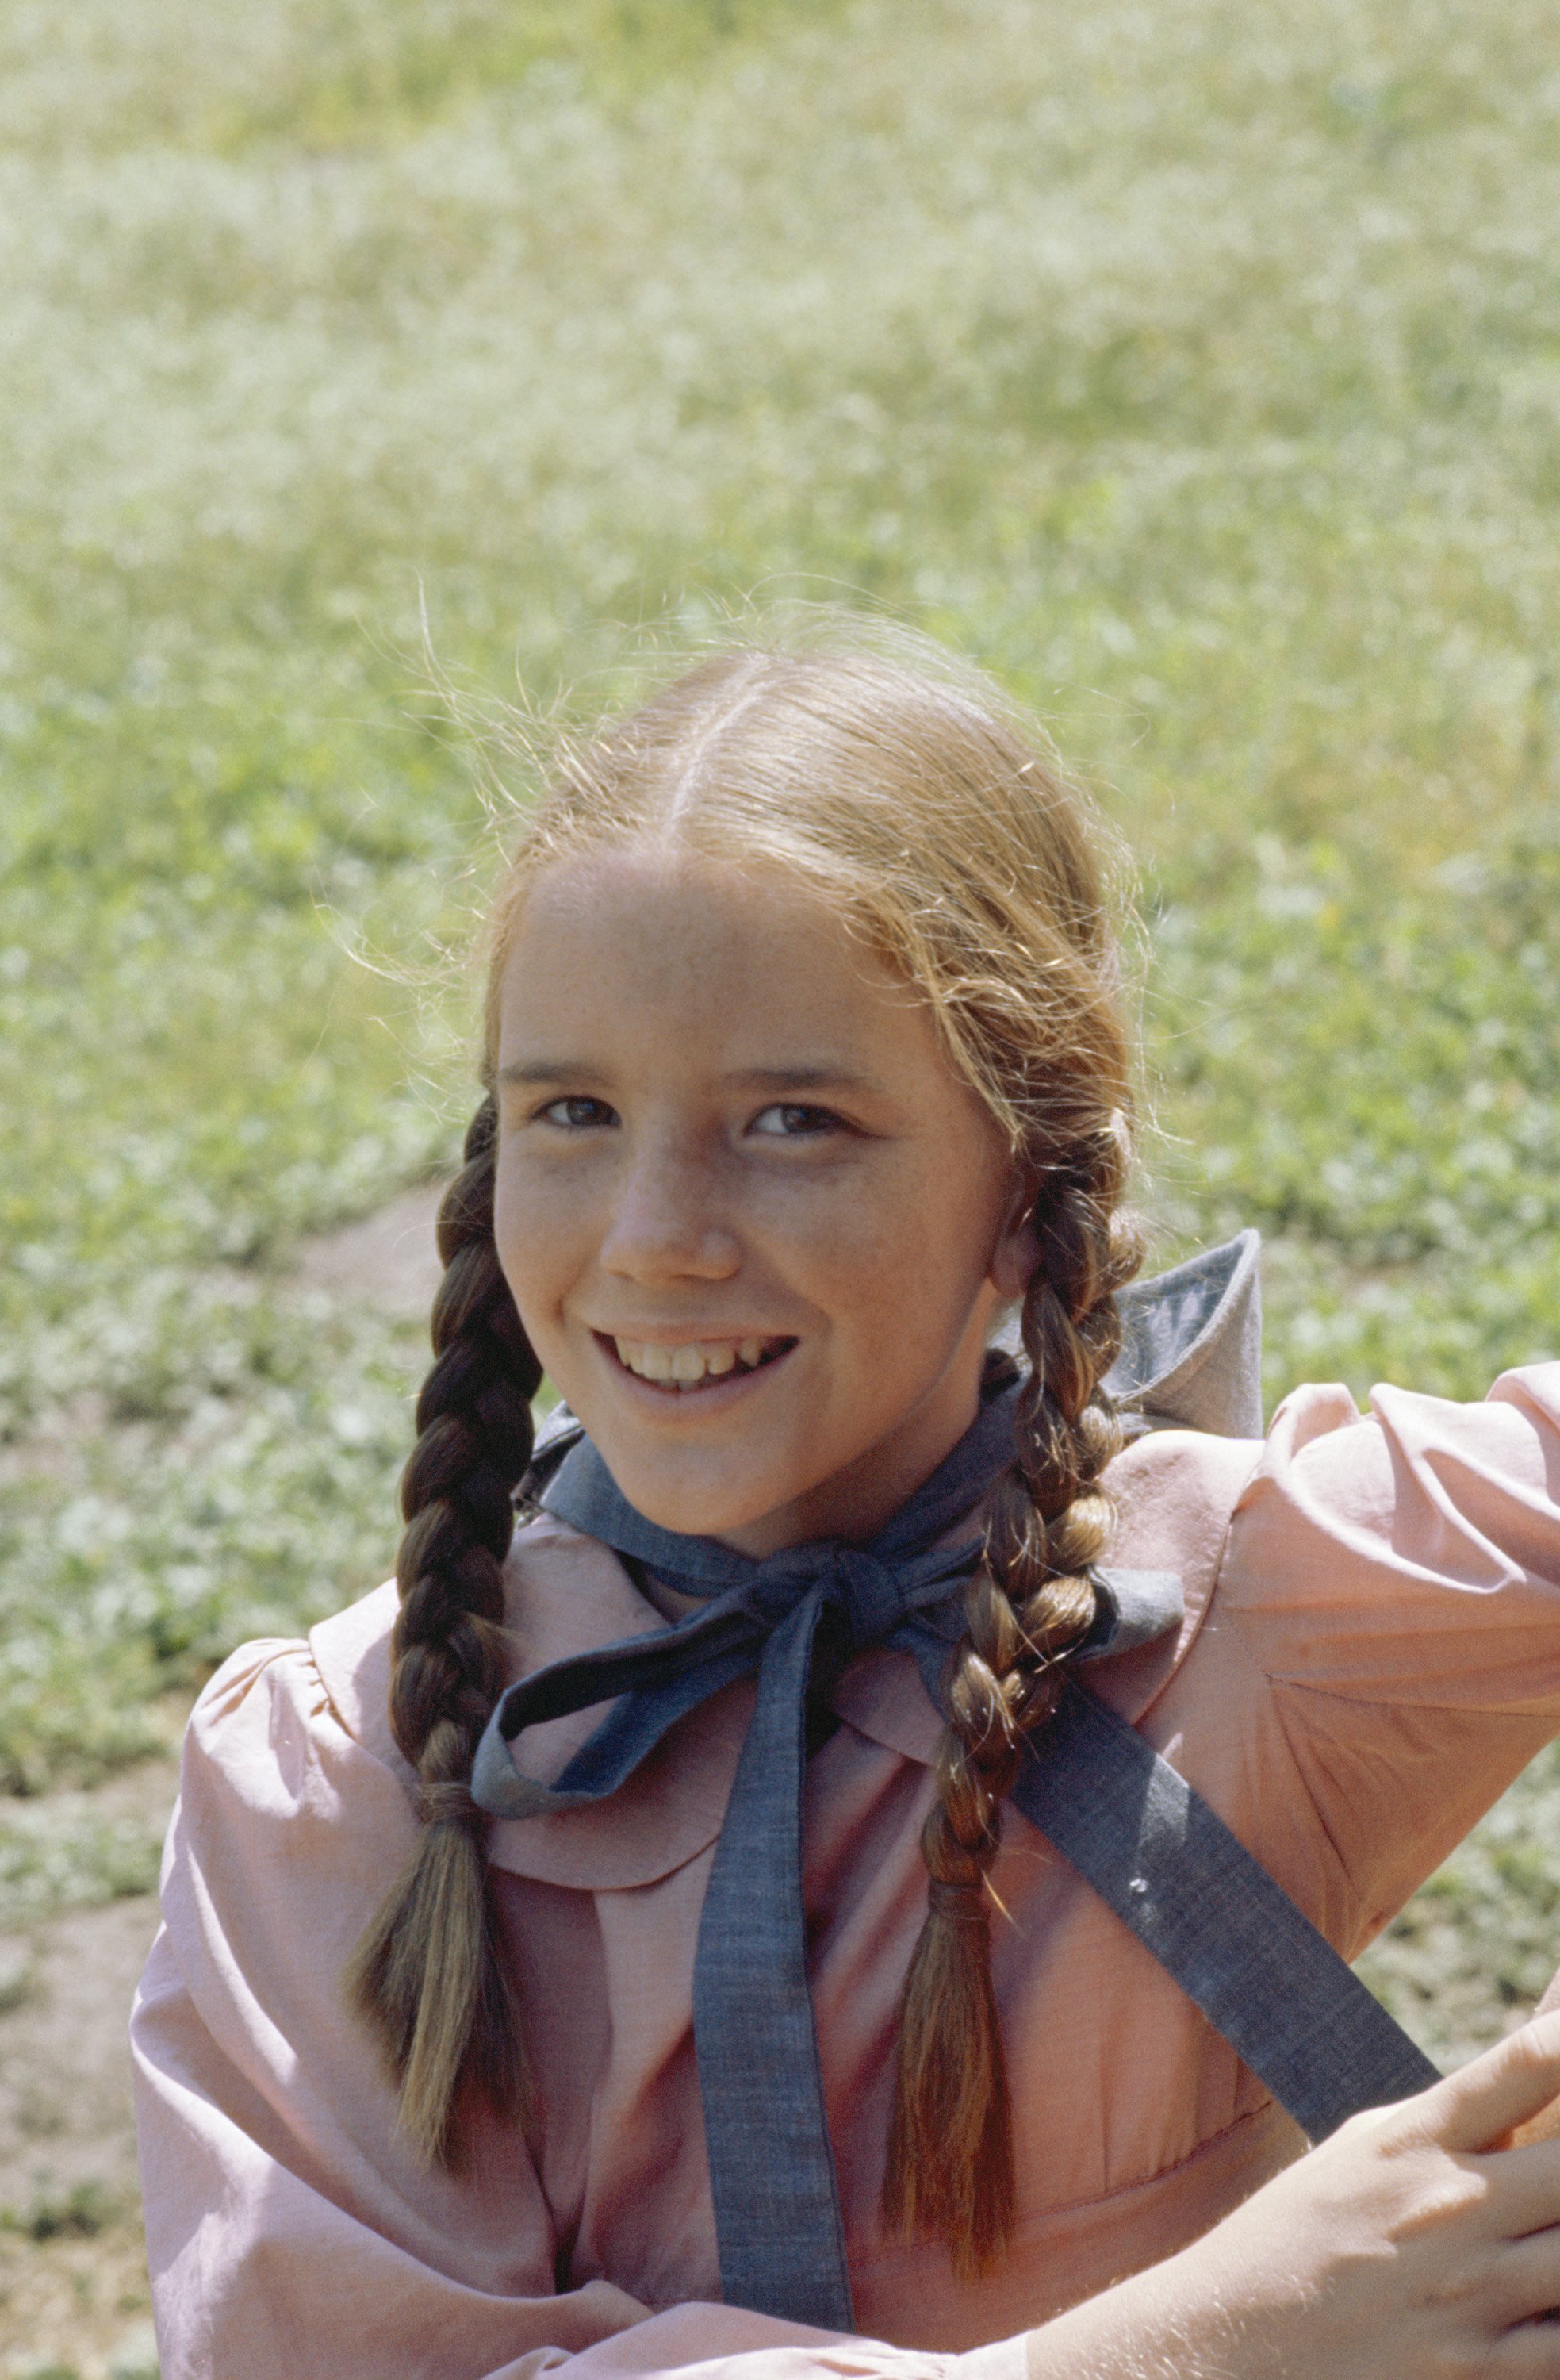 Melissa Gilbert as Laura Ingalls on "Little House on the Prairie" | Source: Getty Images